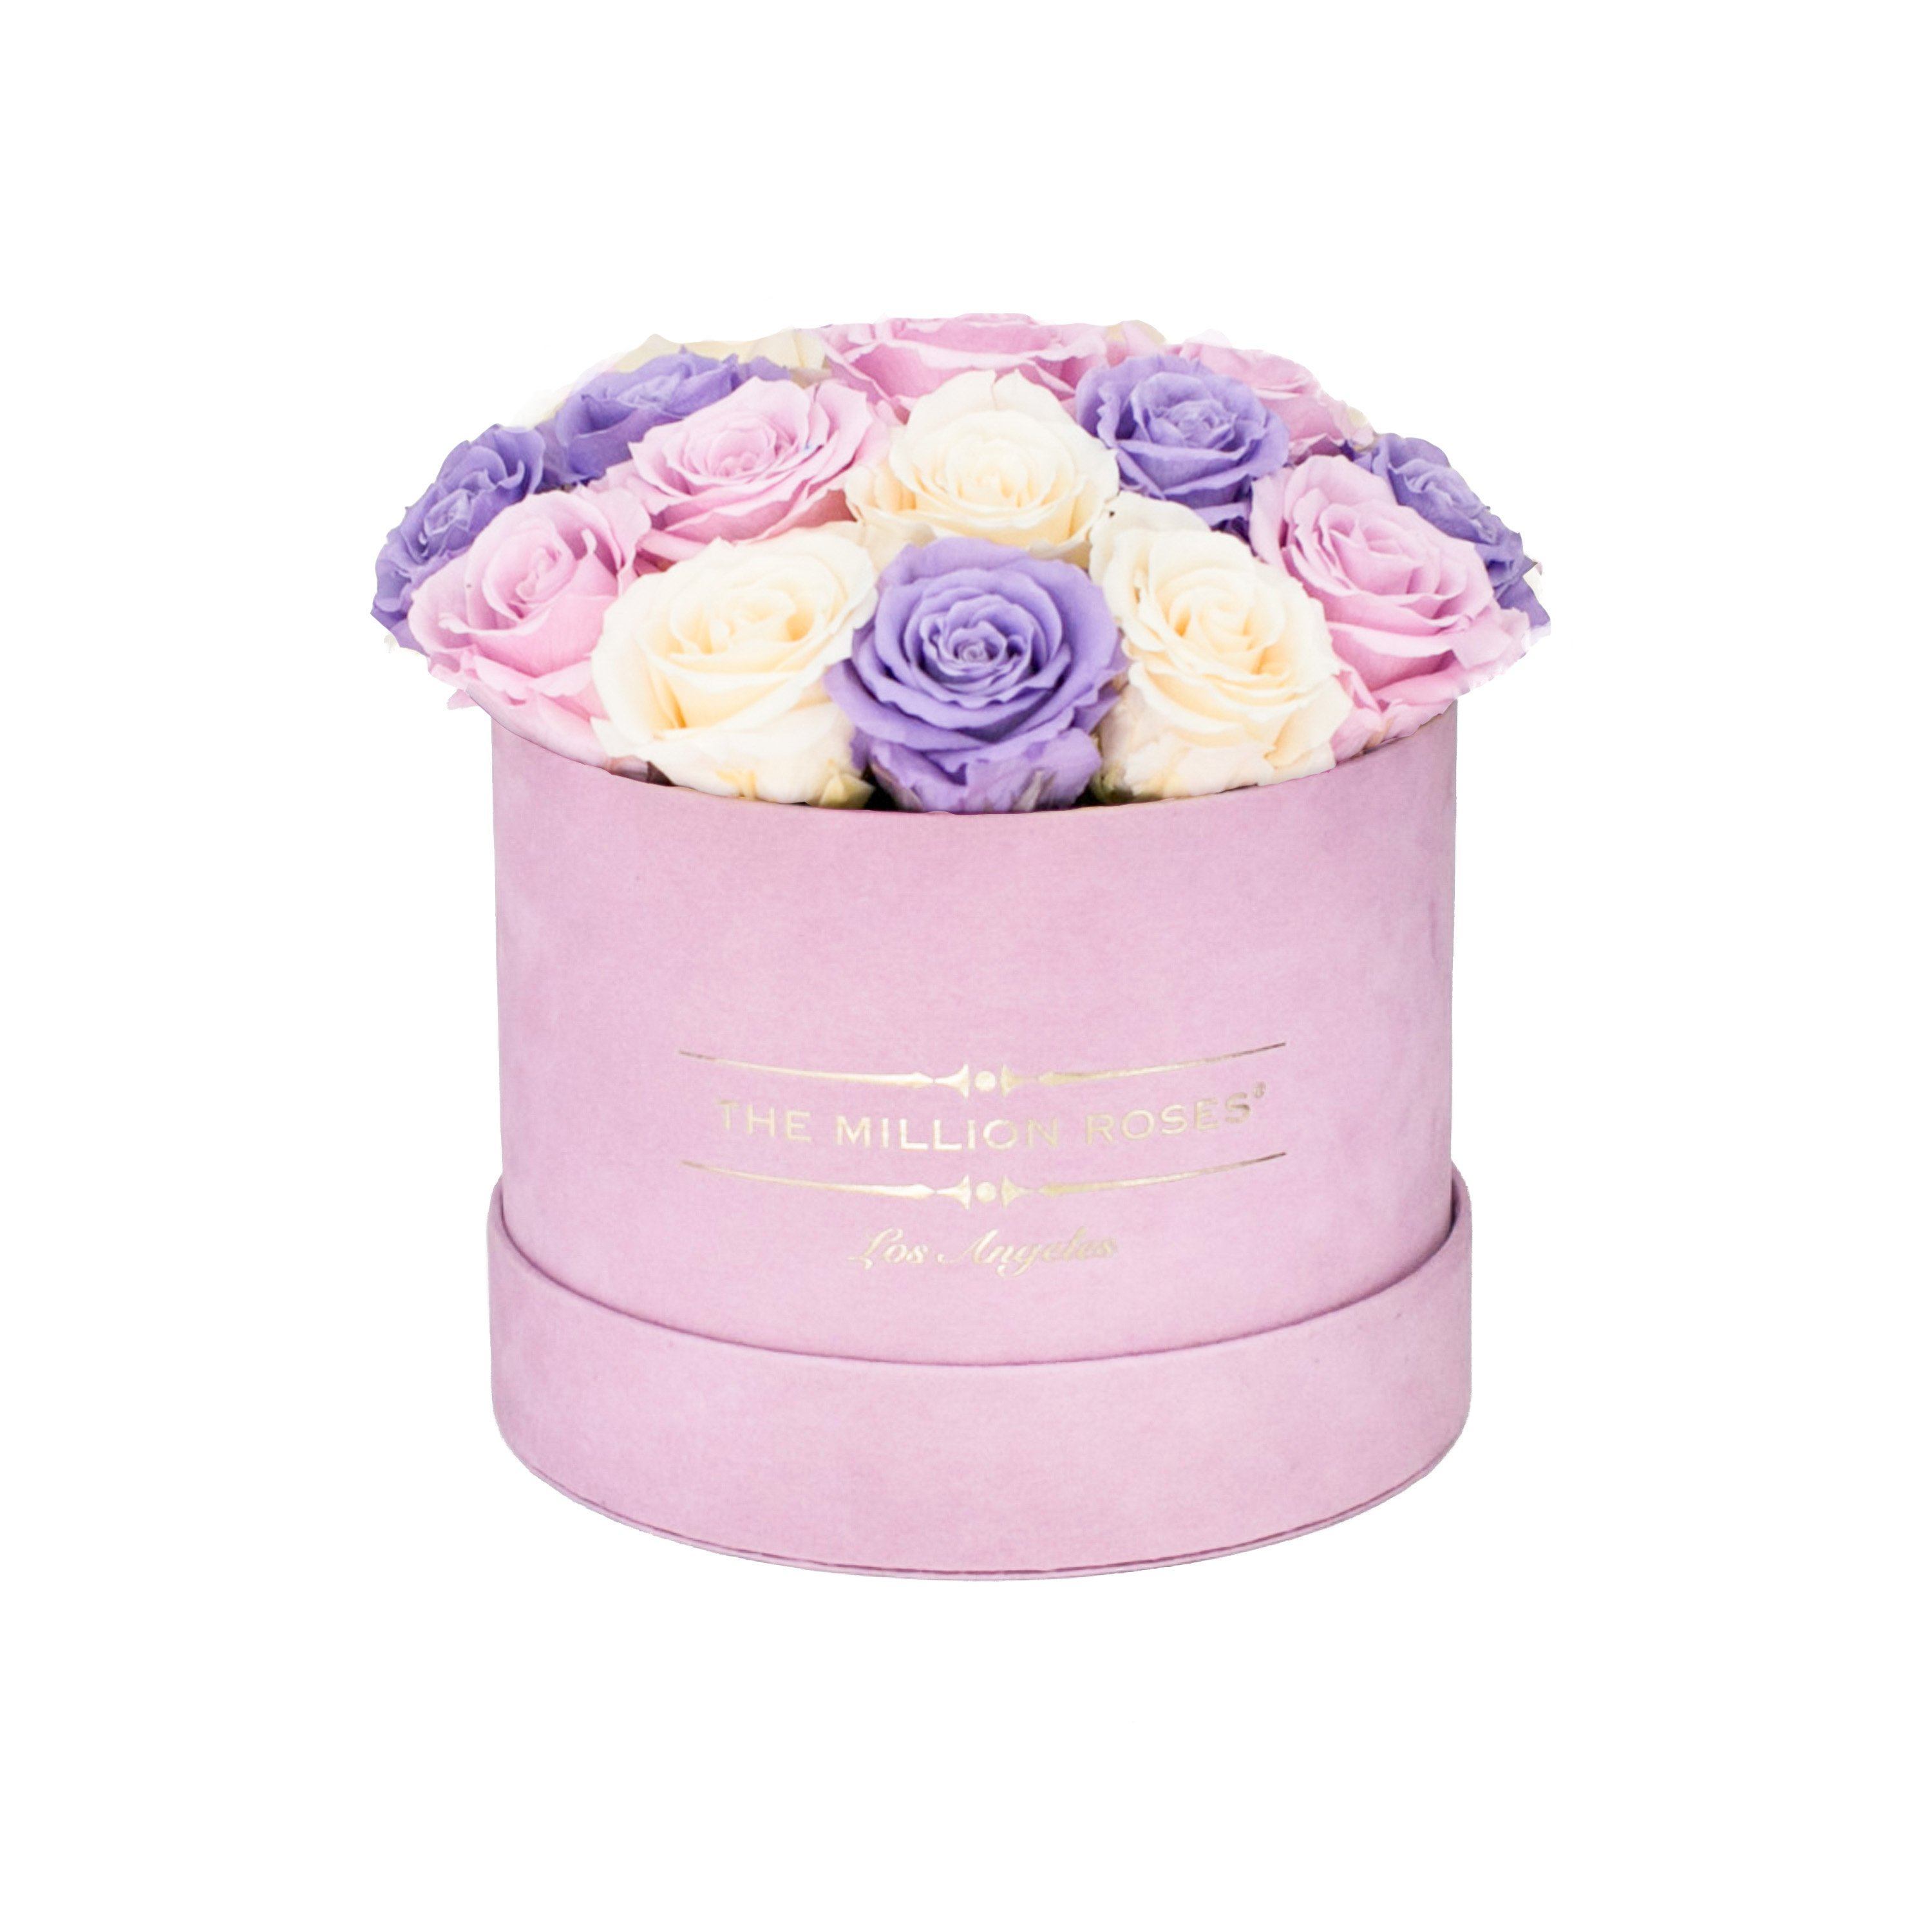 classic round box - light-pink suede box - violet/ivory/pink roses violet eternity roses - the million roses